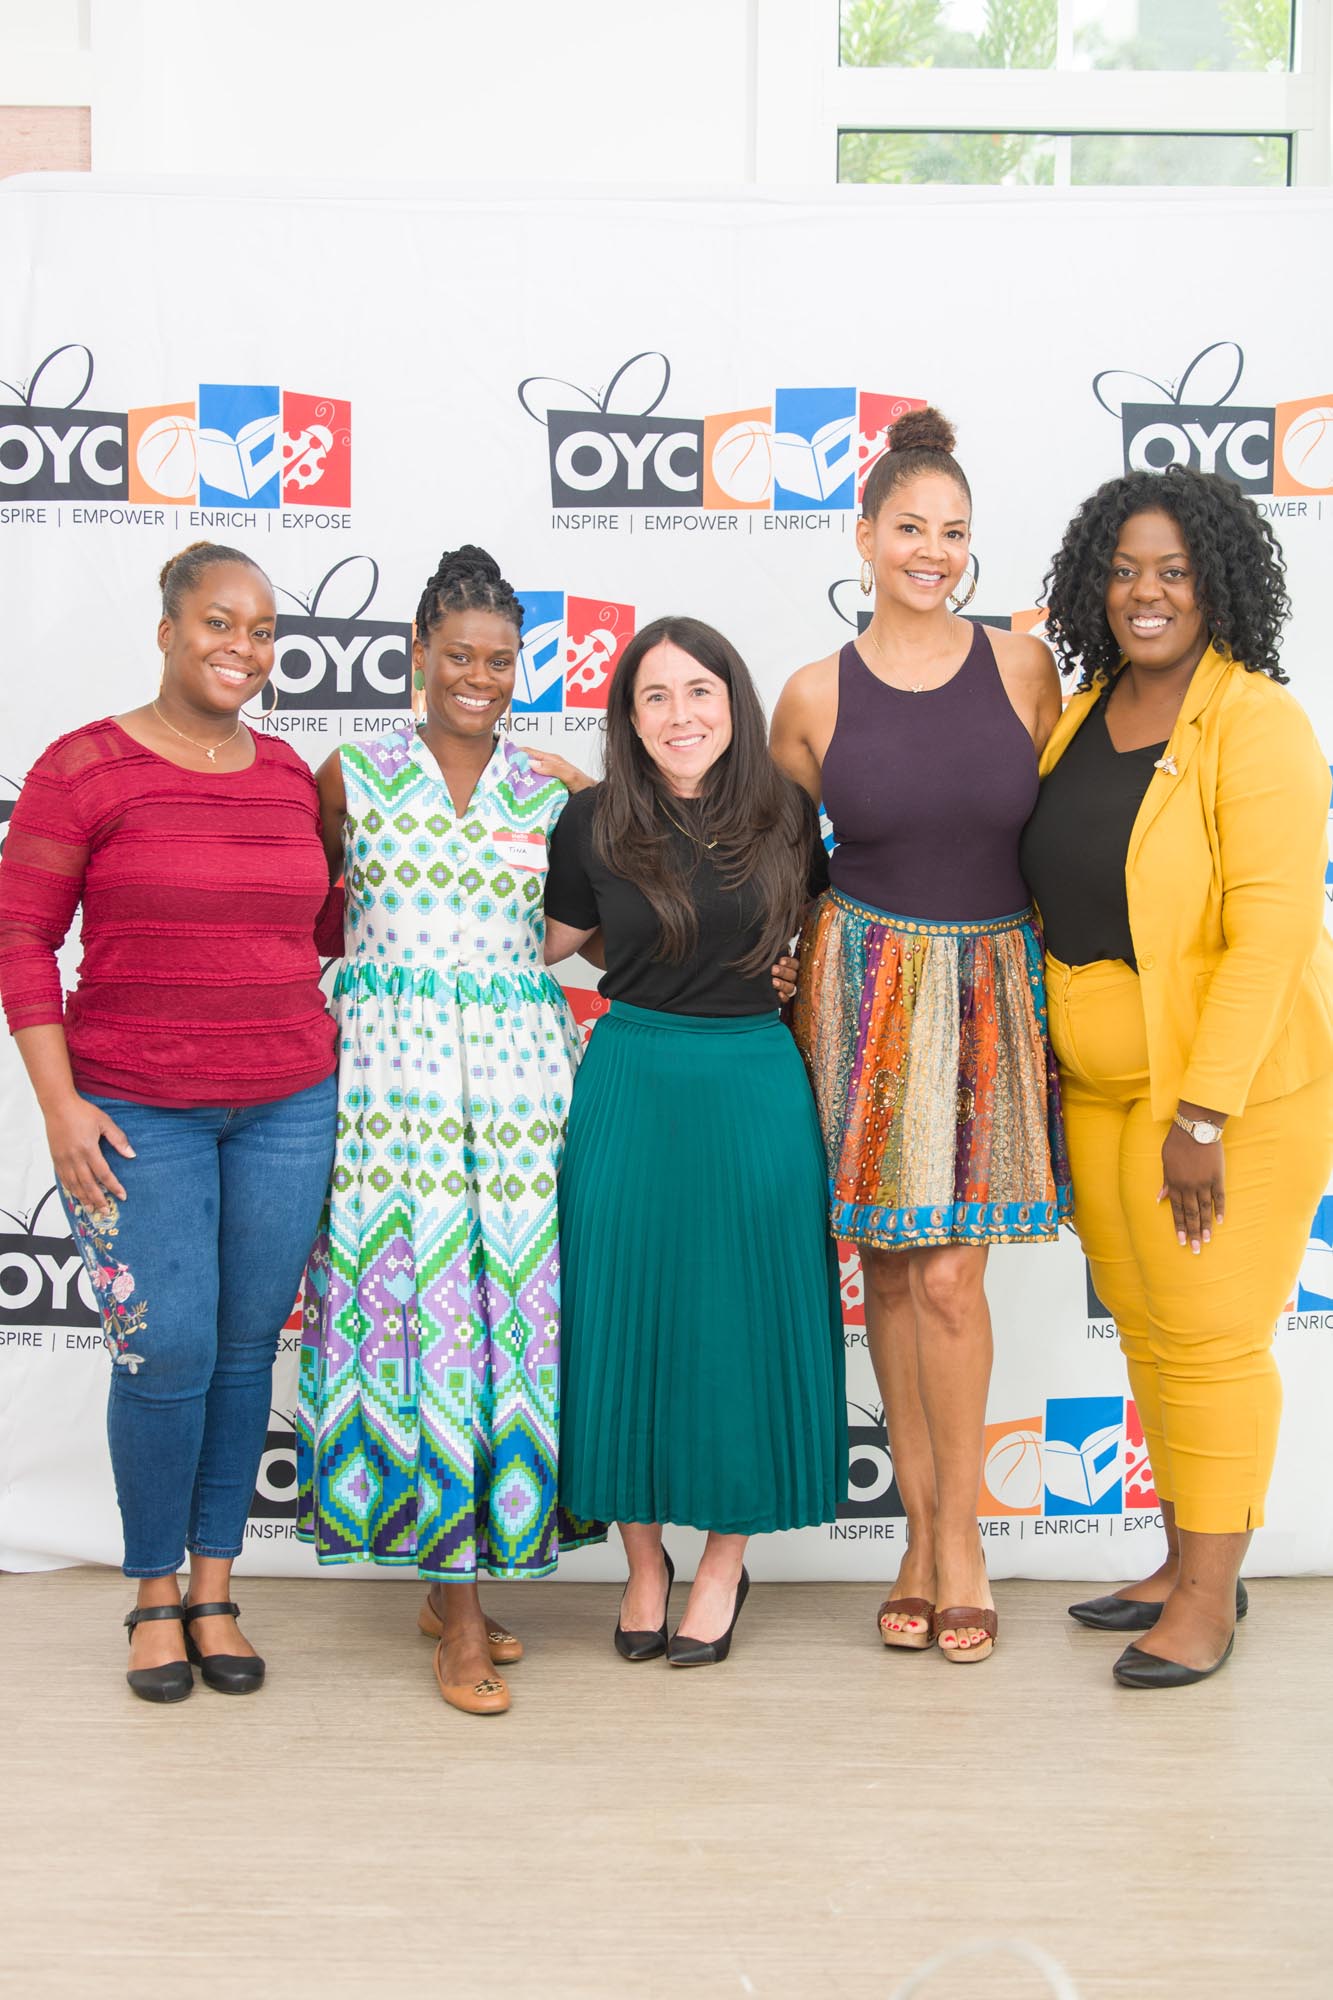 OYC Miami and Honey Shine hosted a Women’s Empowerment Breakfast to celebrate the women who work daily at OYC and Honey Shine as mentors, teachers and role models to hundreds of youth